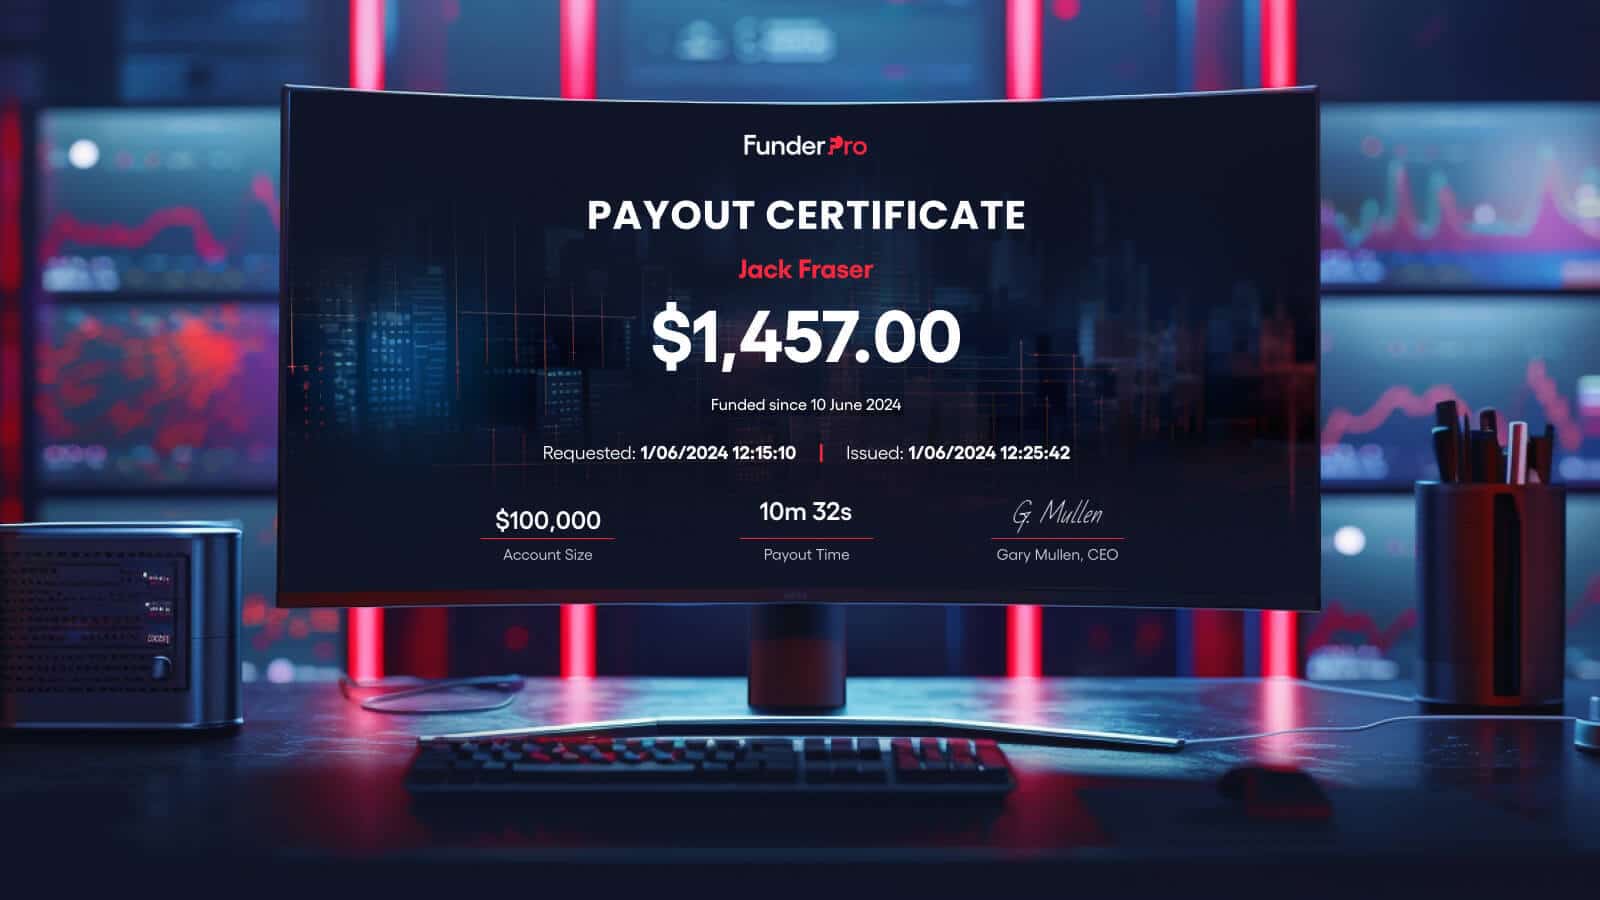 FunderPro payout certificate